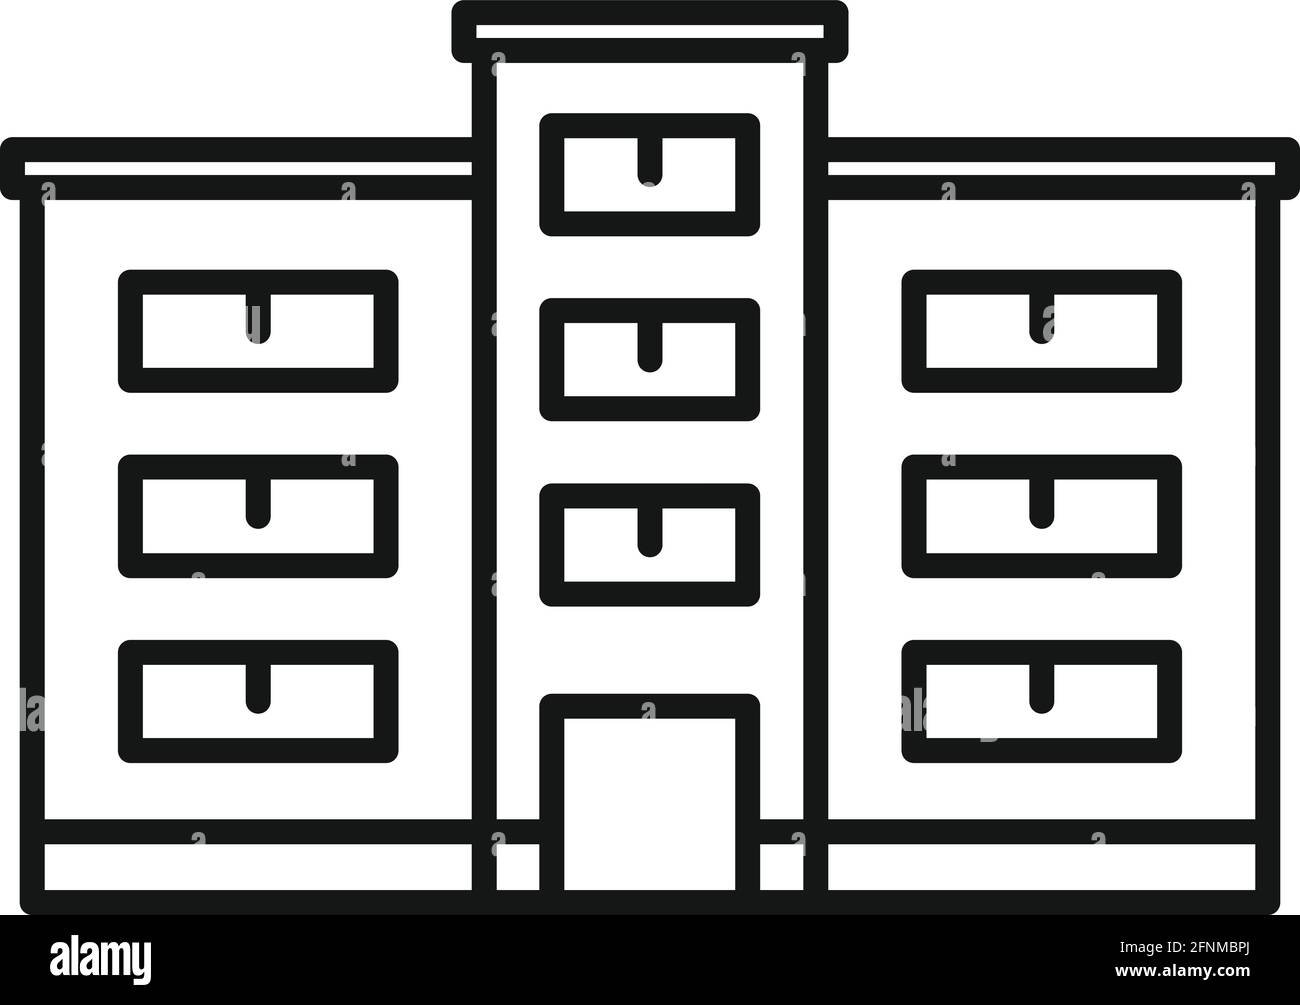 Pension building icon, outline style Stock Vector